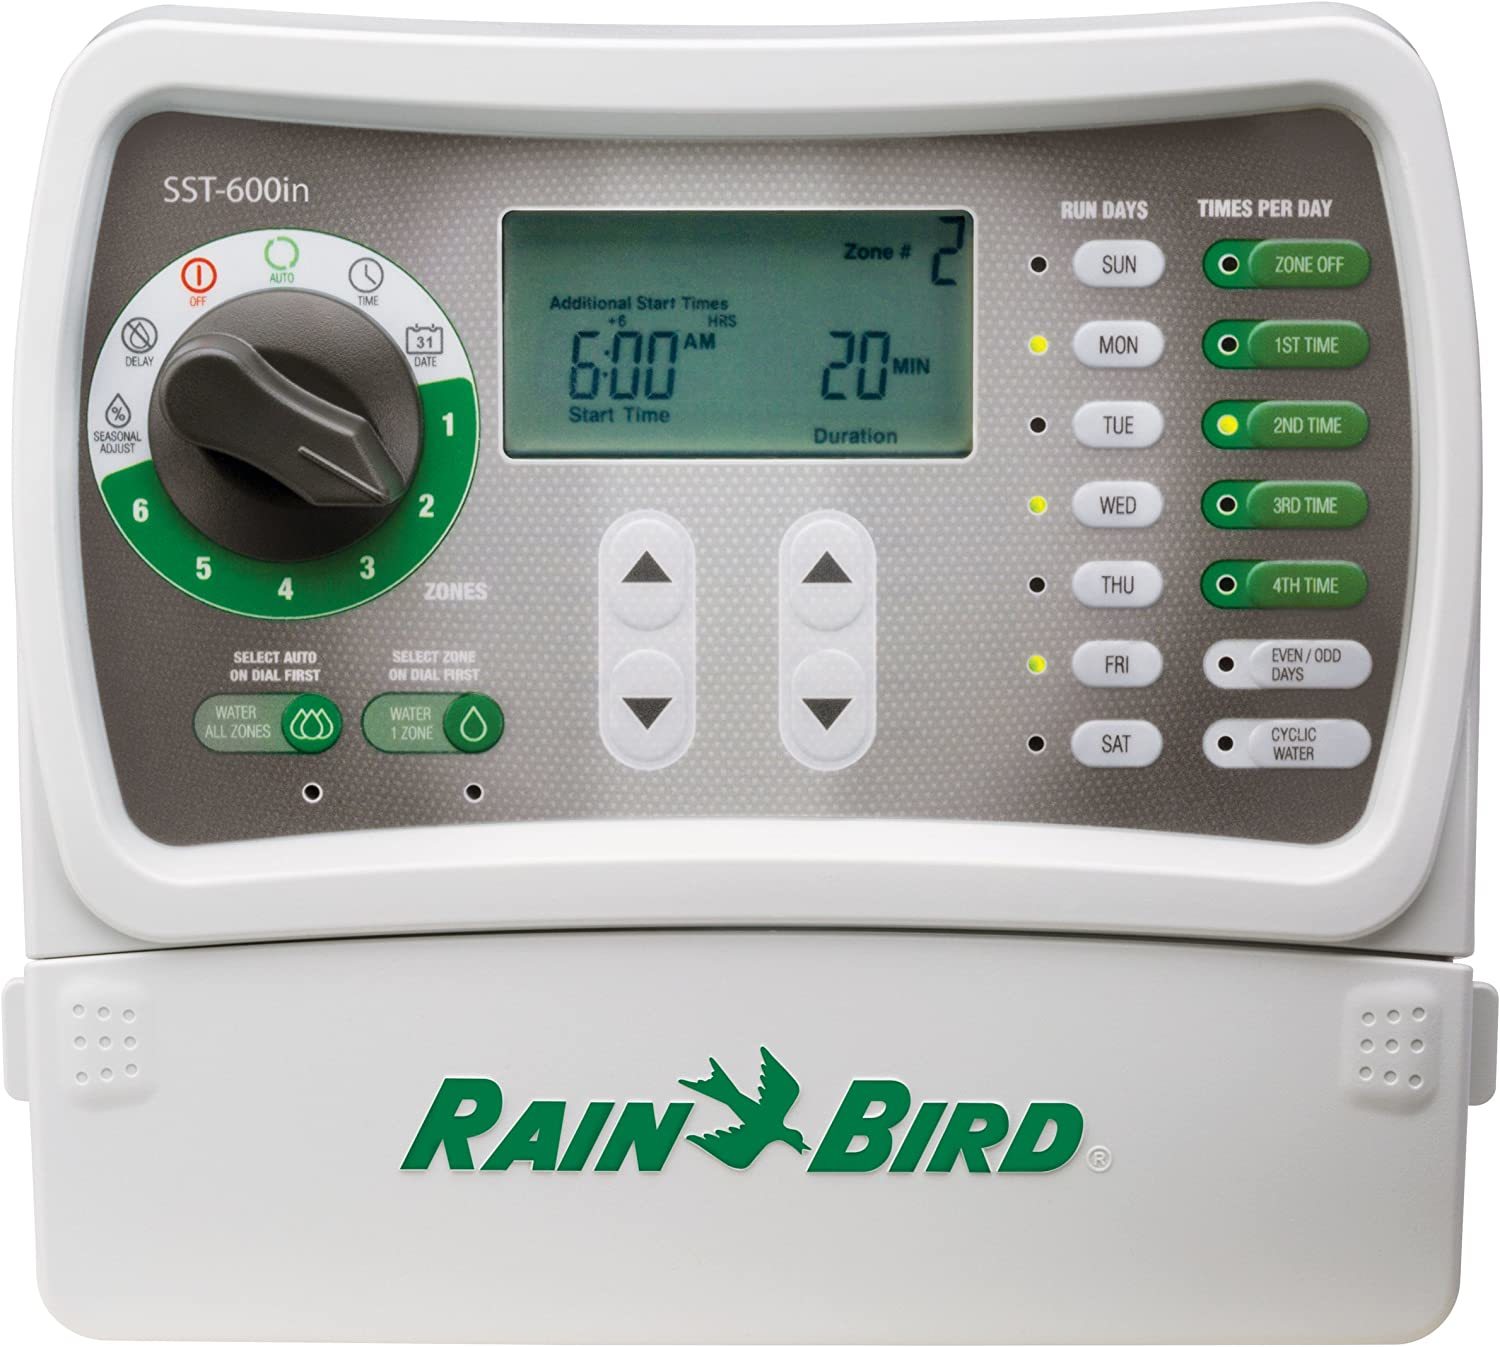 Rain Bird SST600IN Simple-To-Set, this new/improved model replaces SST600I - $76.99